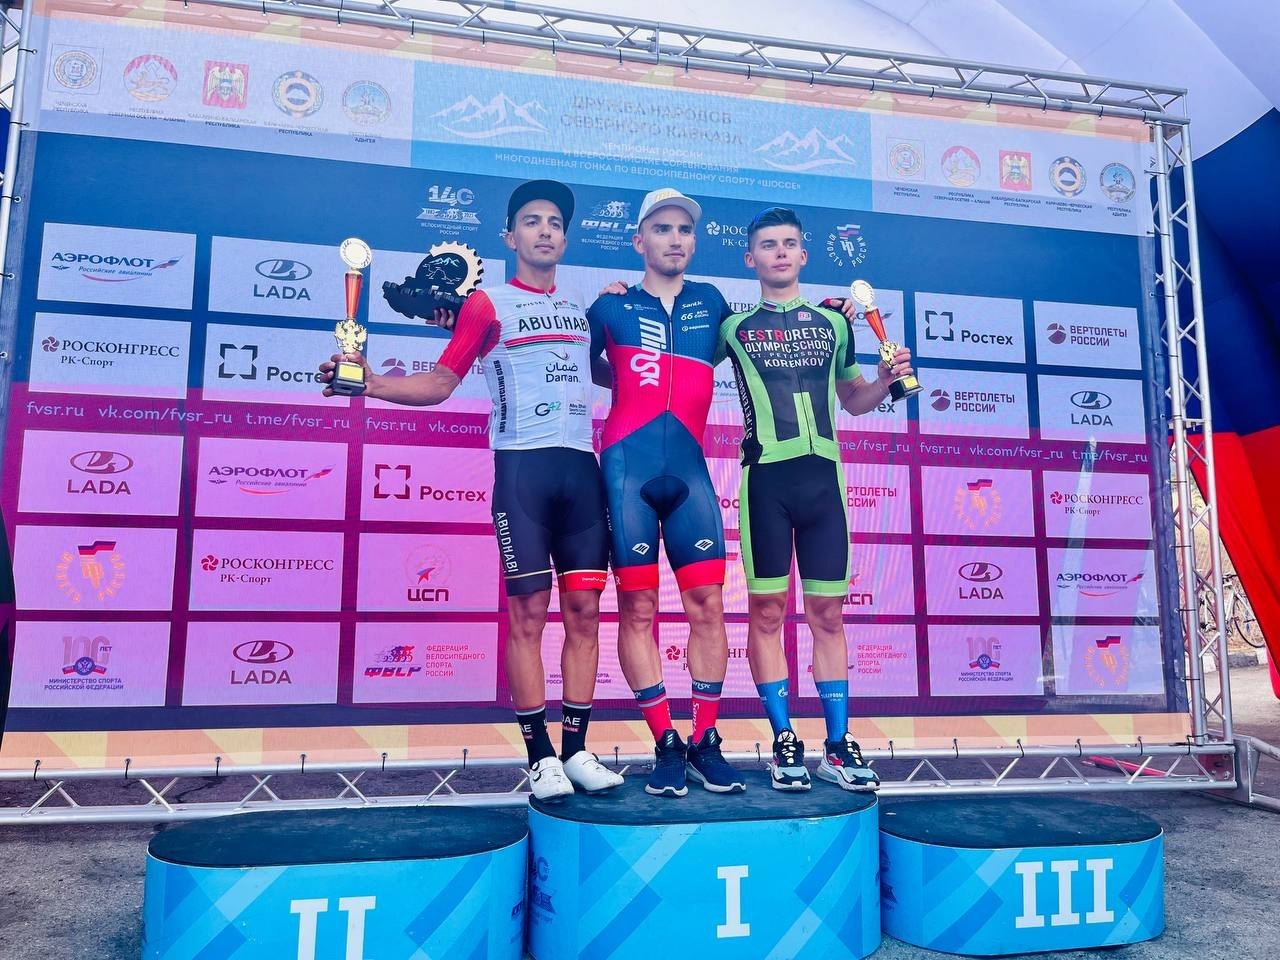 Shauchenka and Yarash are the Winners of the Second Stage of the Tour of Kavkaz